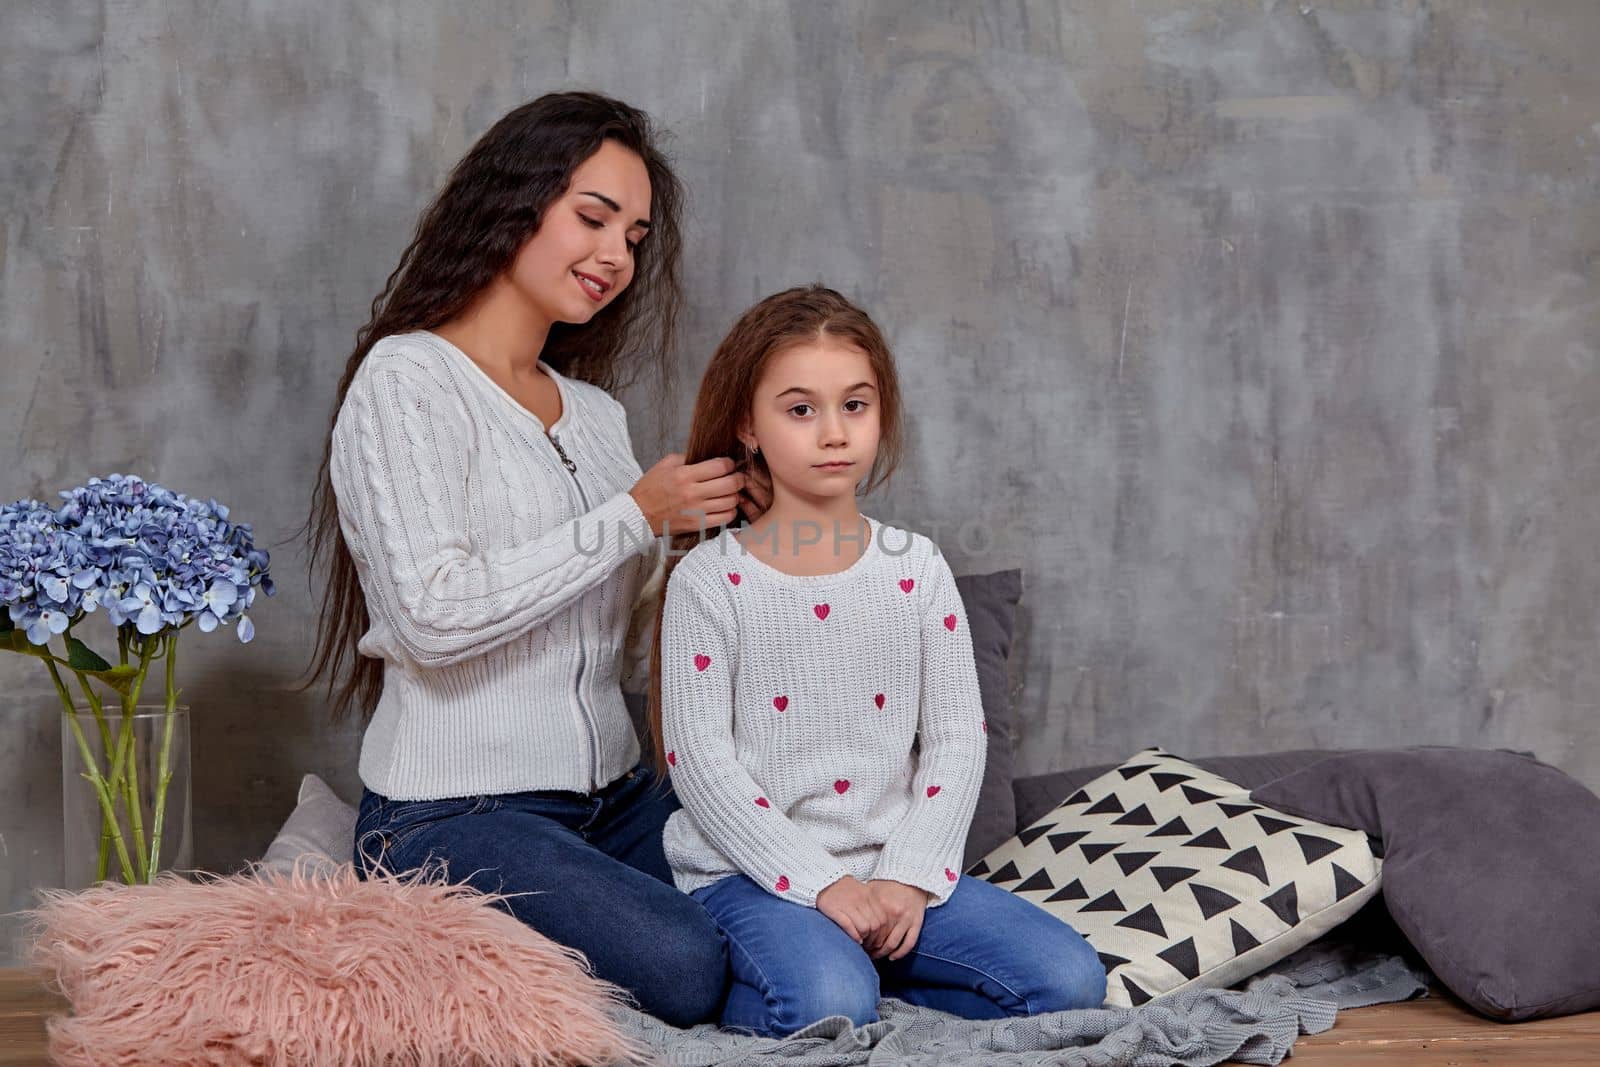 Eemotions of a beautiful young mother and her little daughter who spend time together. They sit on the floor and mom cares for her daughter's hair